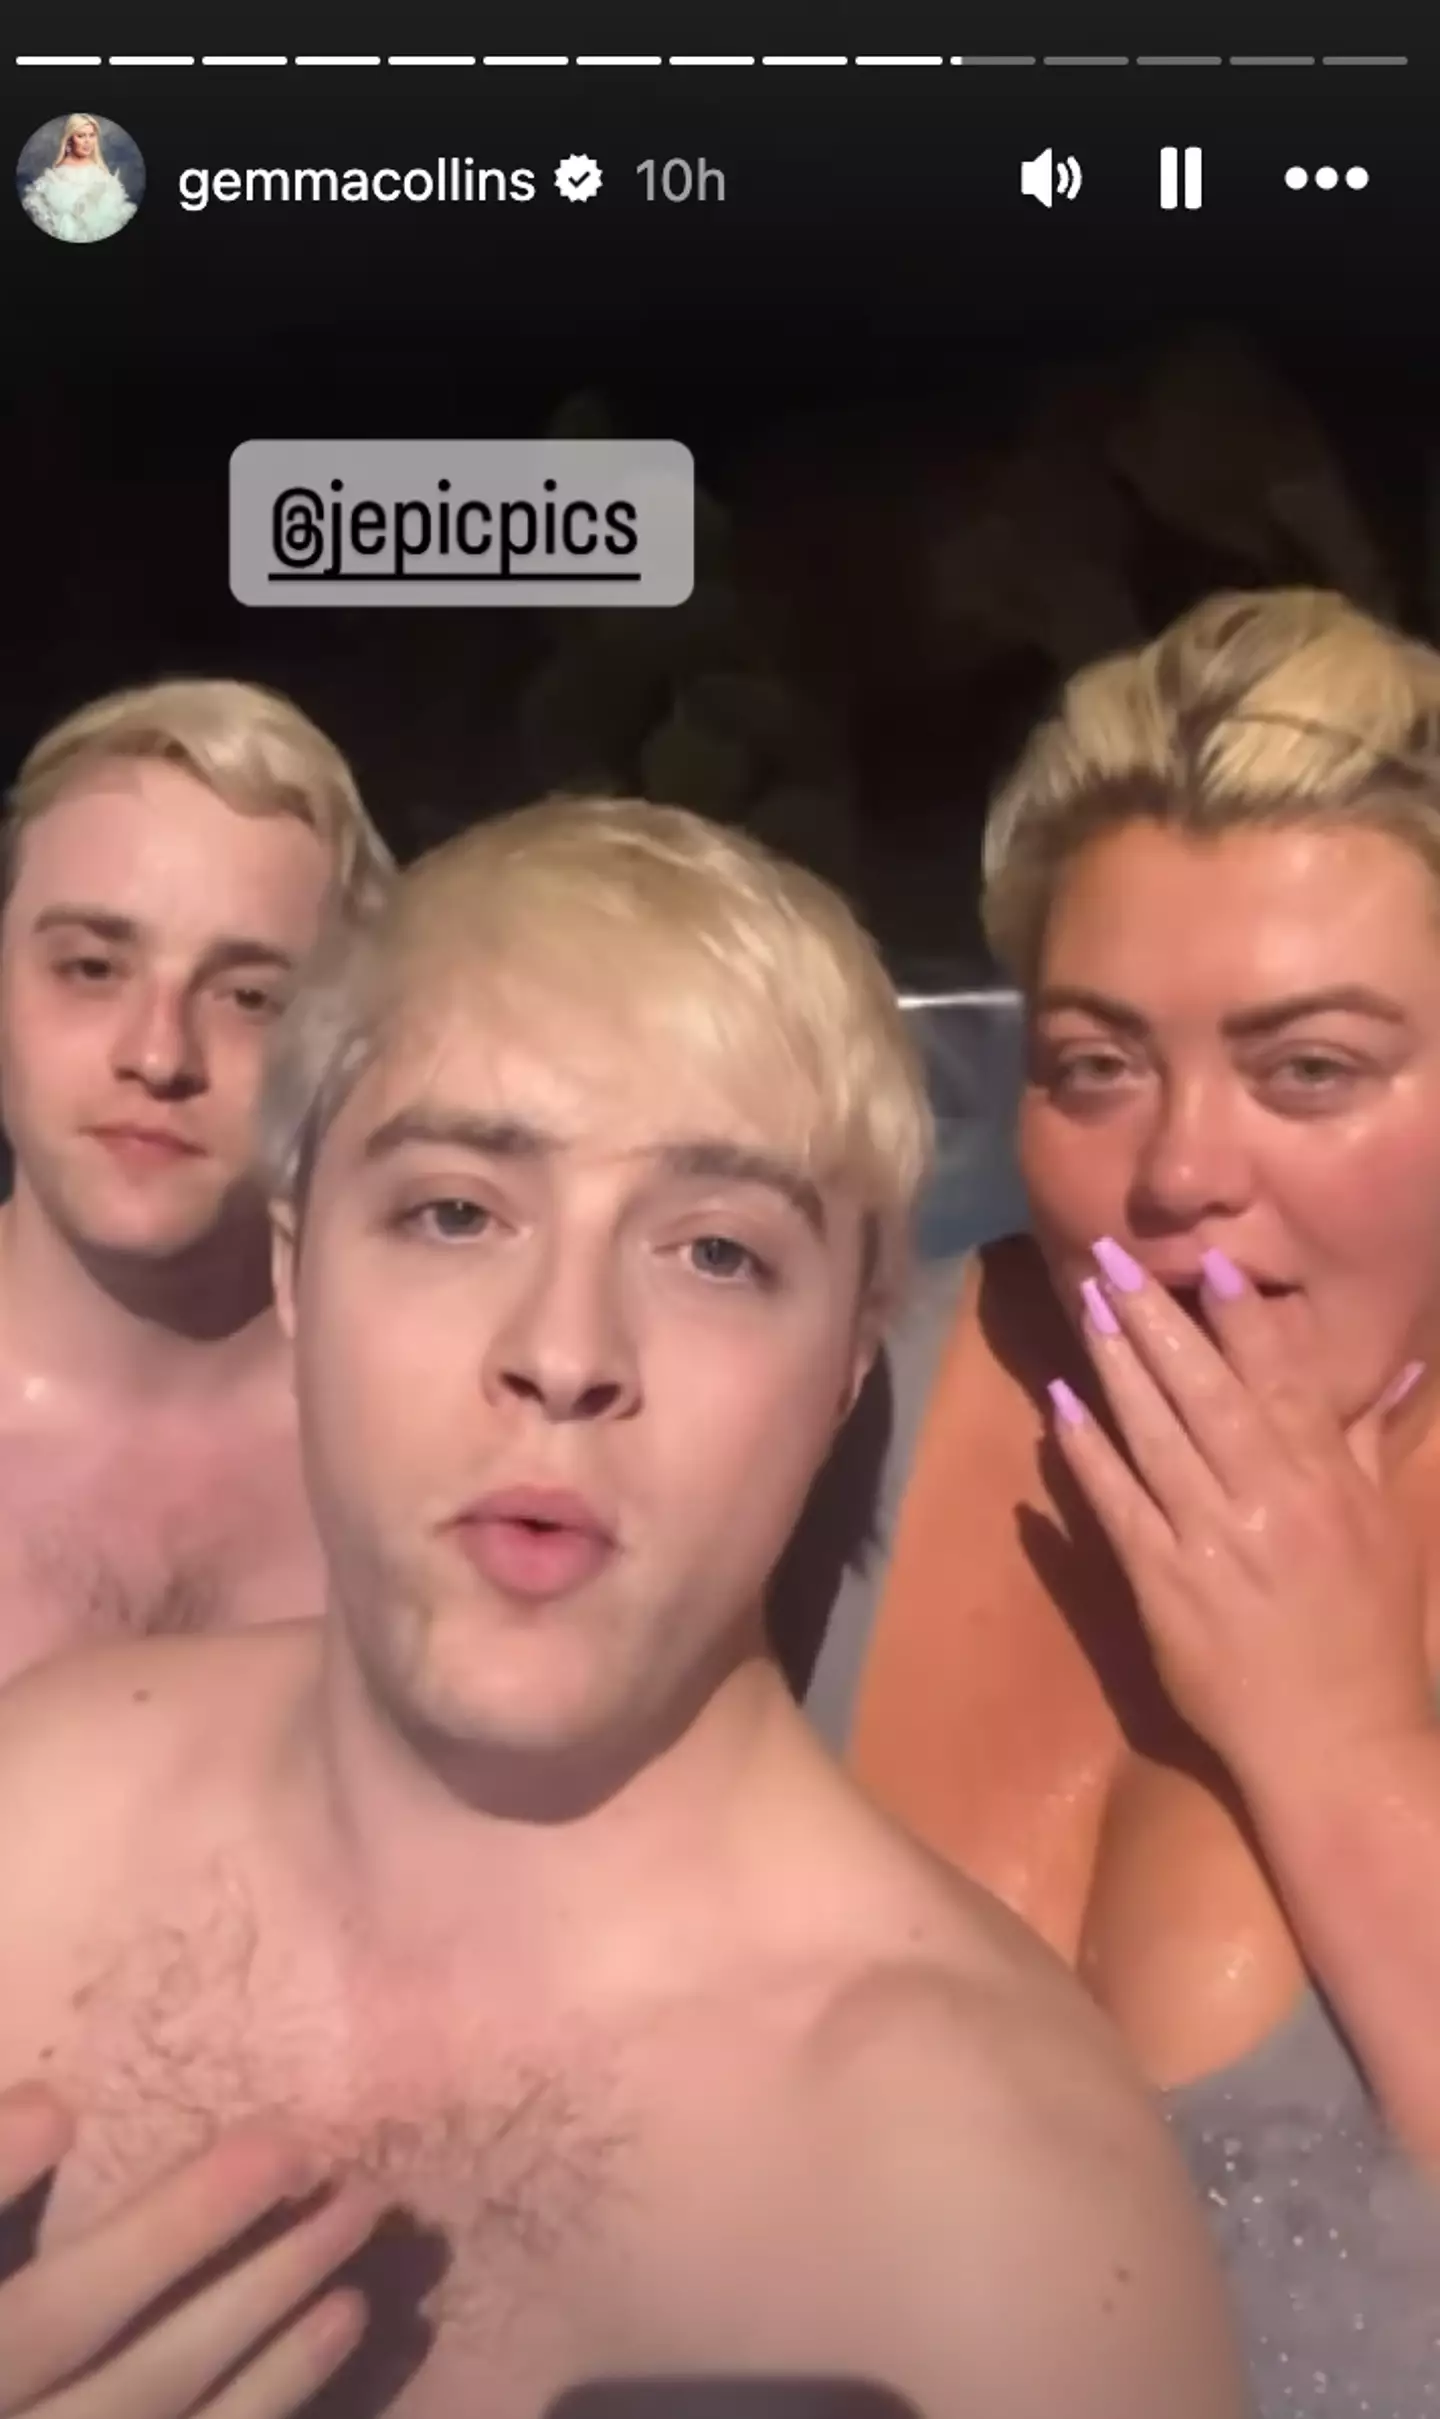 Jedward gave their side of the situation on Gemma Collins' Instagram story.